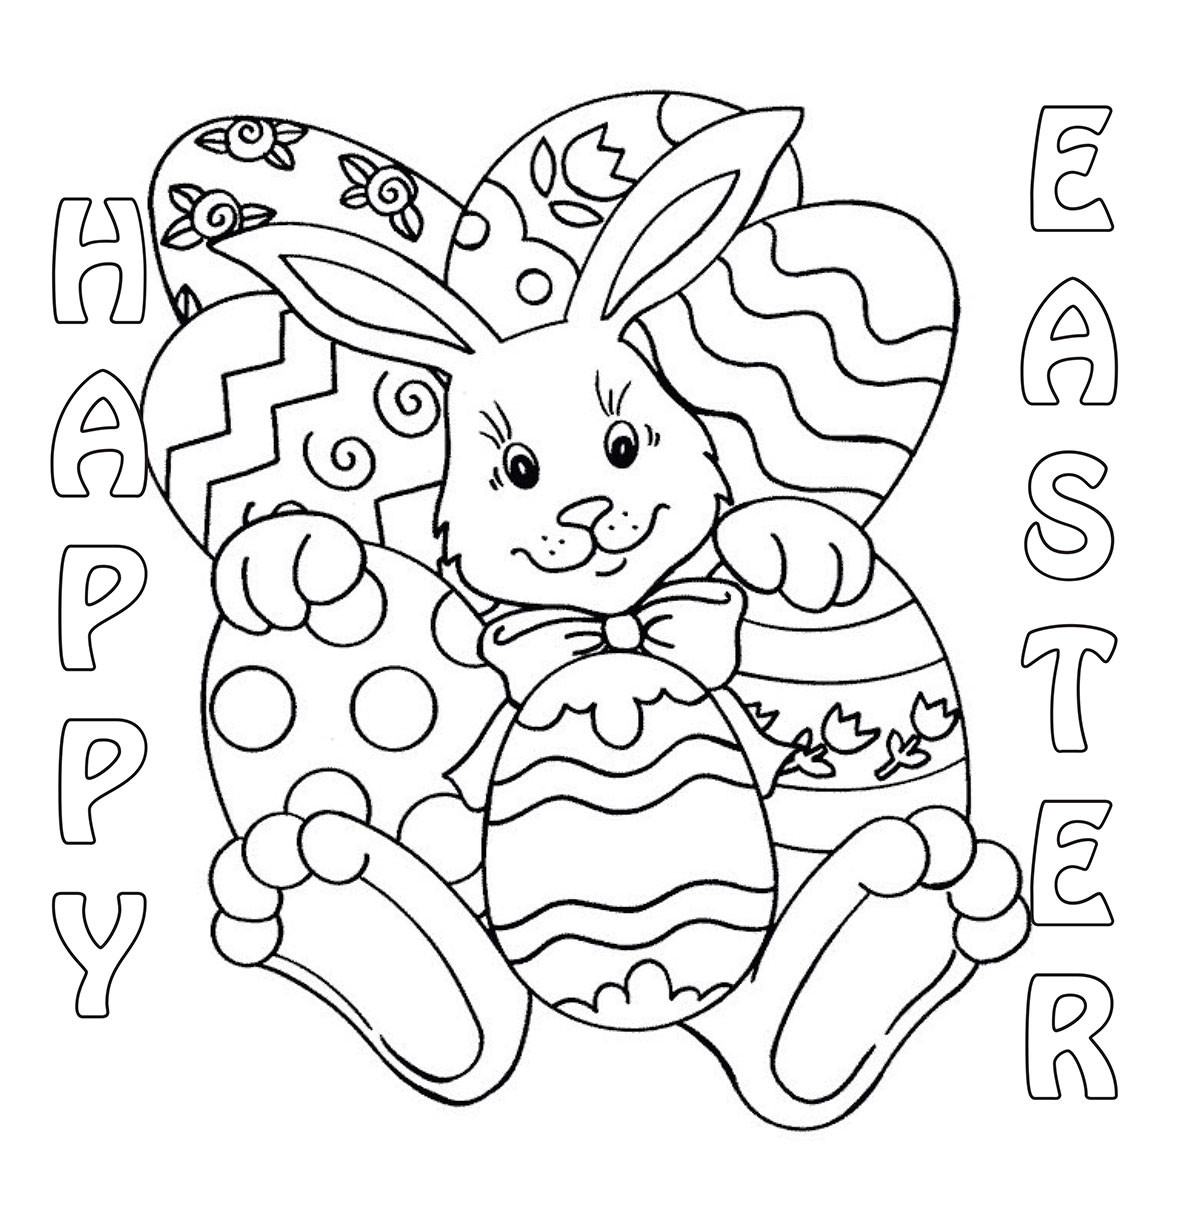 Easter Coloring Pages For Toddlers
 Easter Coloring Contest 2014